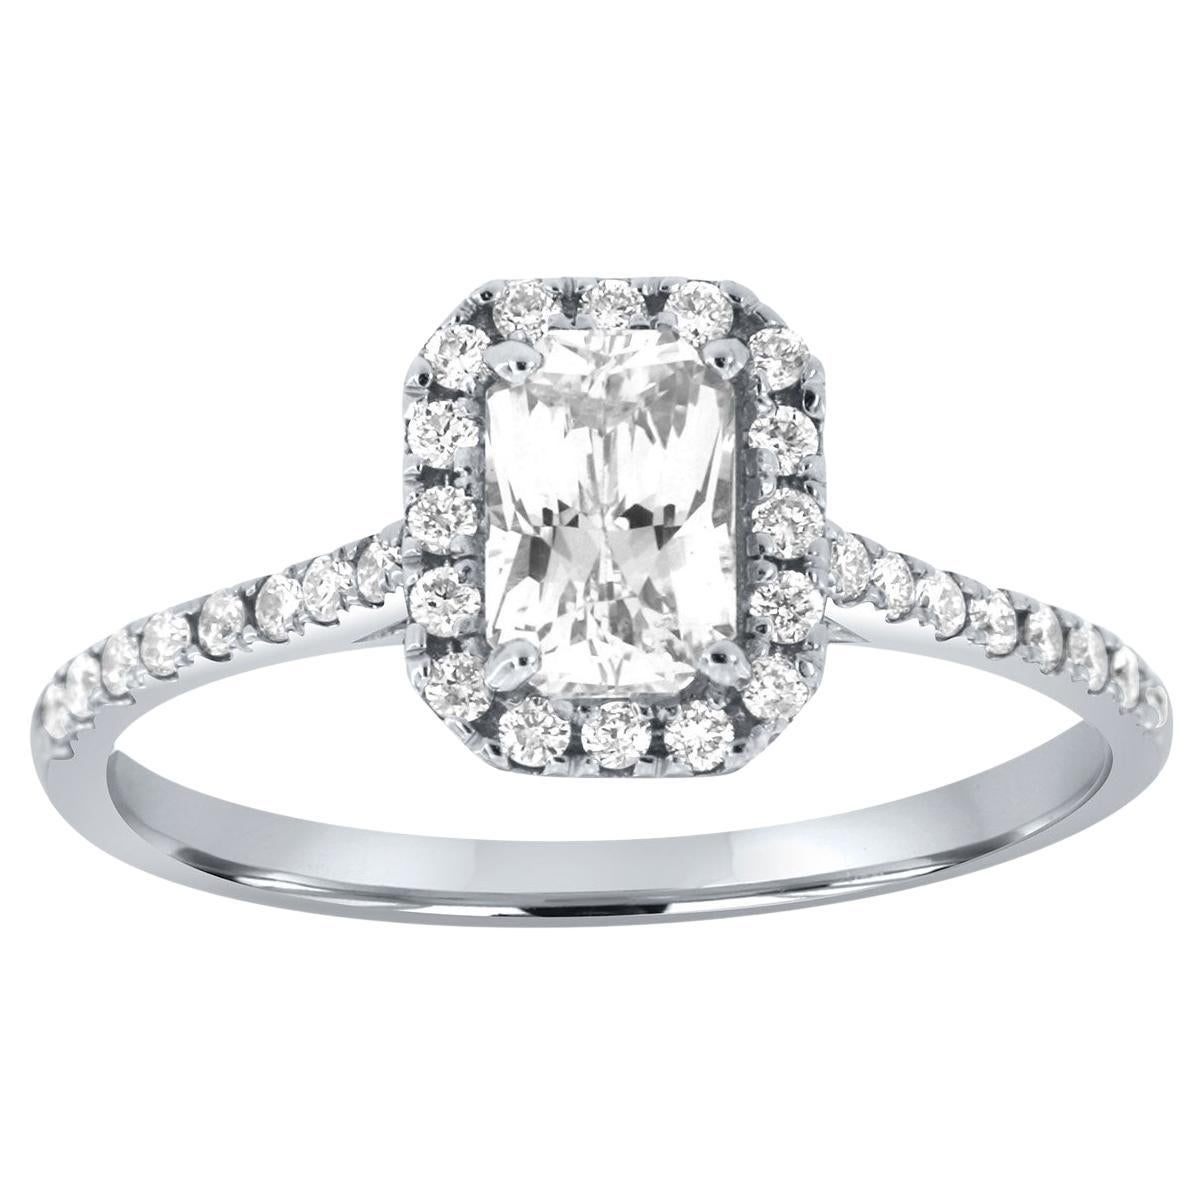 This 14K White gold ring set features a 0.86-carat non-heated Elongated Radiant Natural White Sapphire encircled by a halo of brilliant round diamonds, Micro-Prongs set on top of a 1.4mm wide band. A perfectly matching diamond band completes this